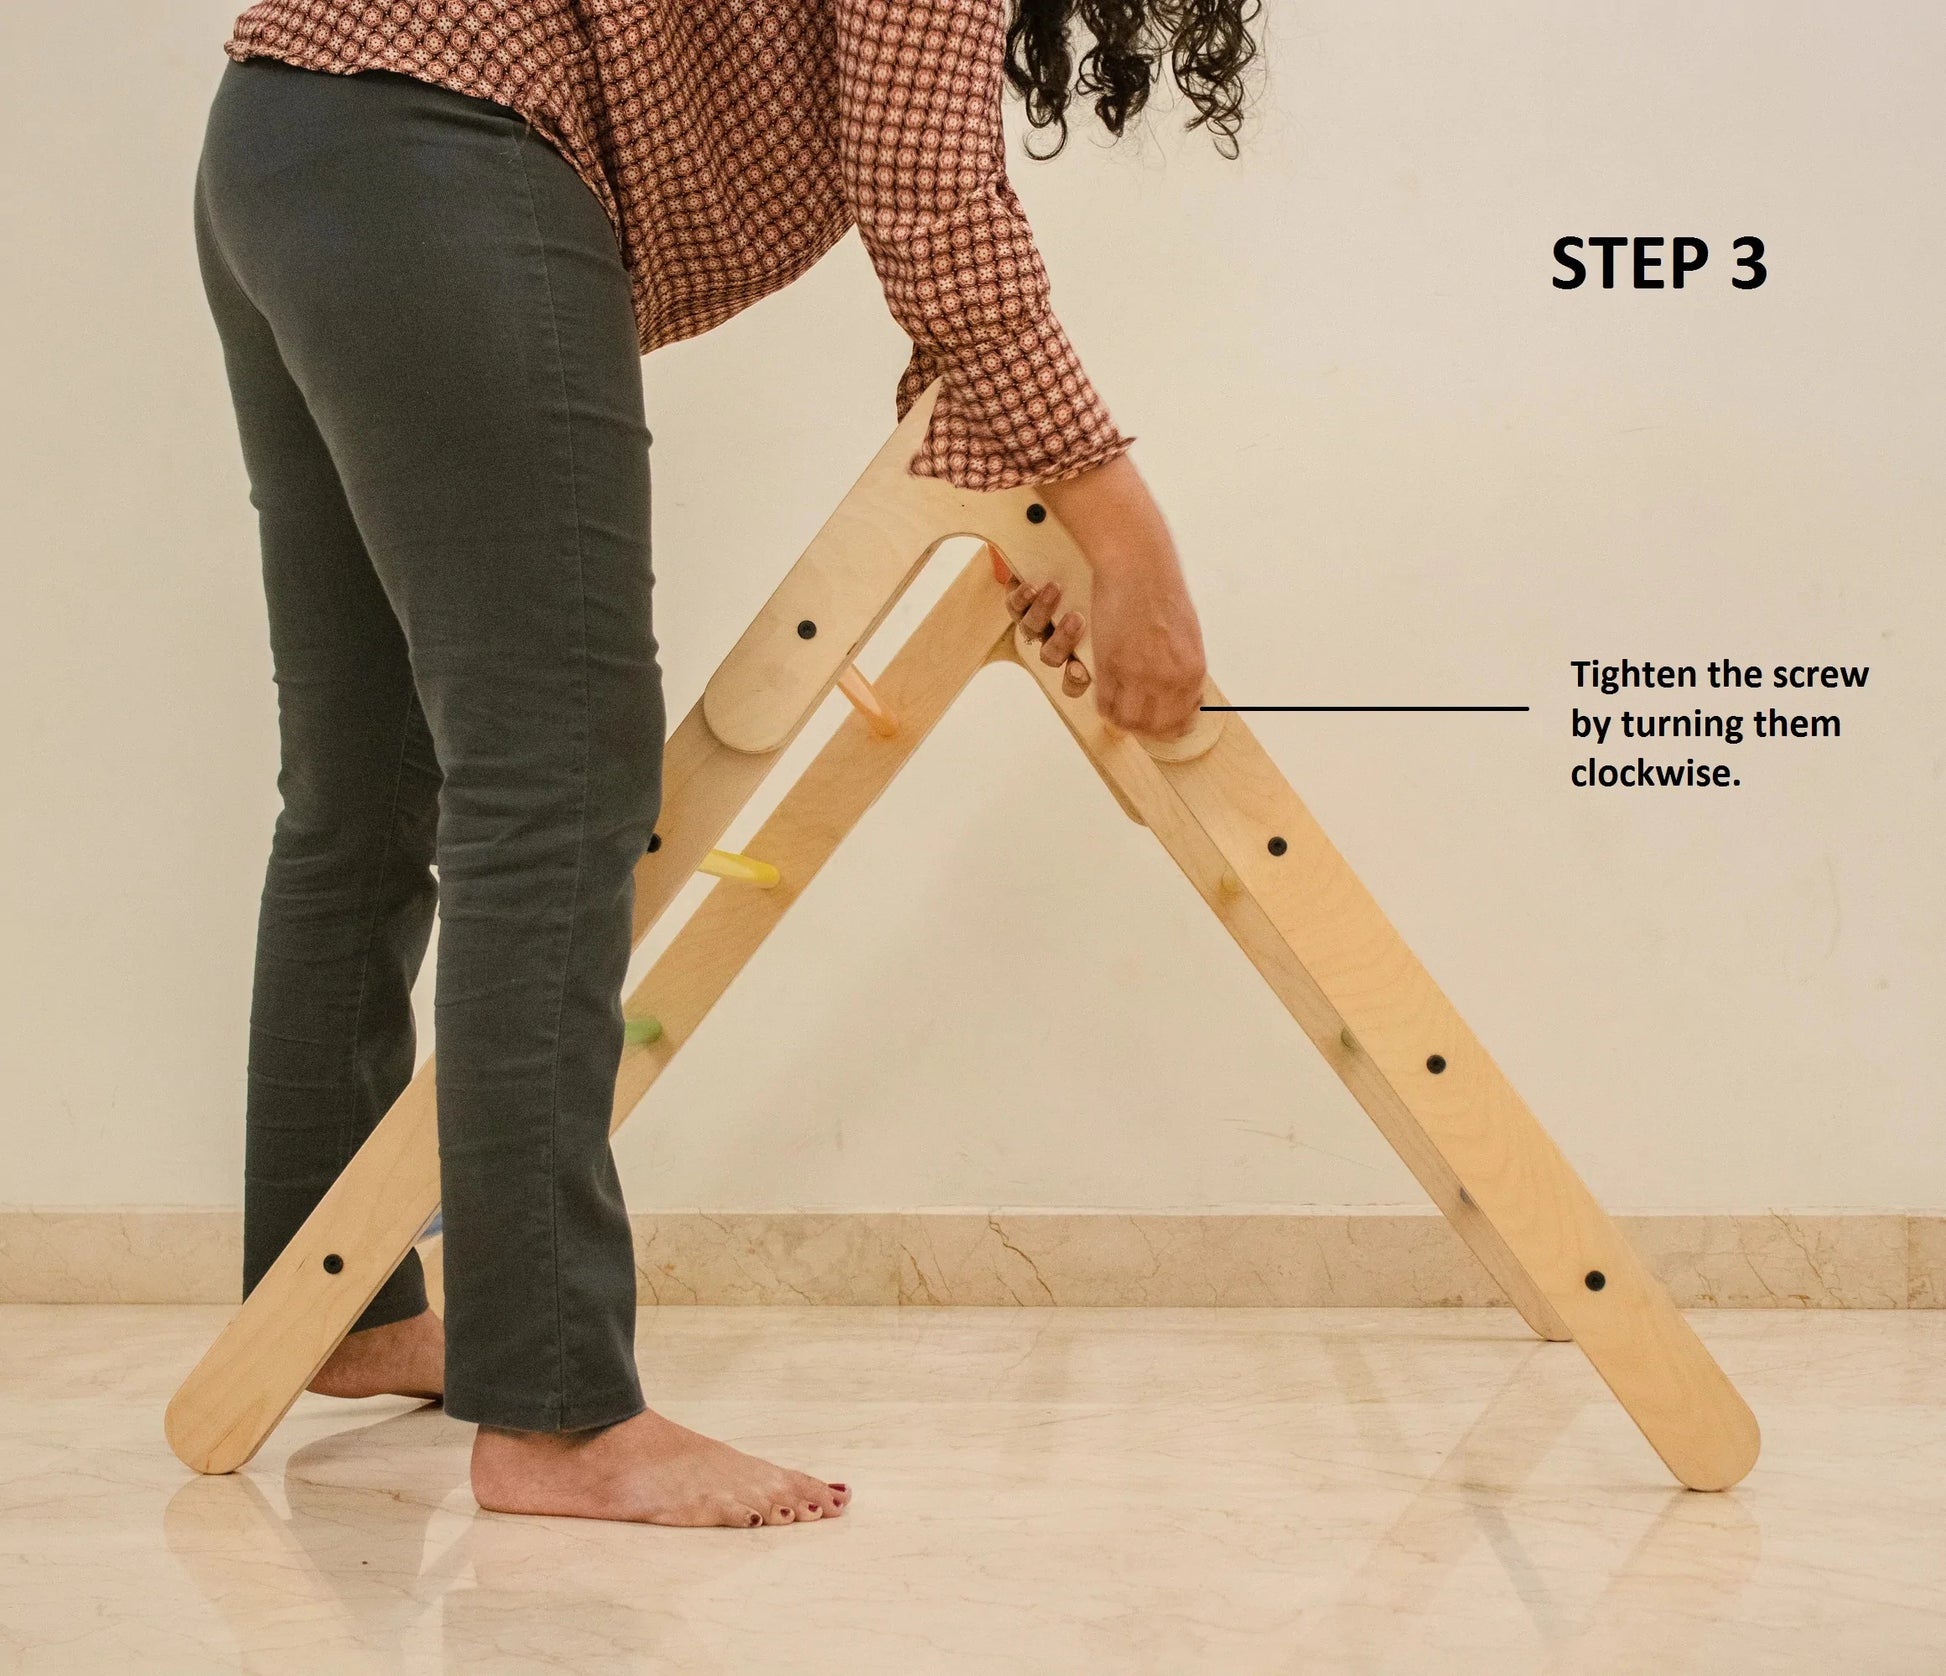 Buy The Climbing & Pikler Triangle with Reversible Ramp - Step 3 - SkilloToys.com